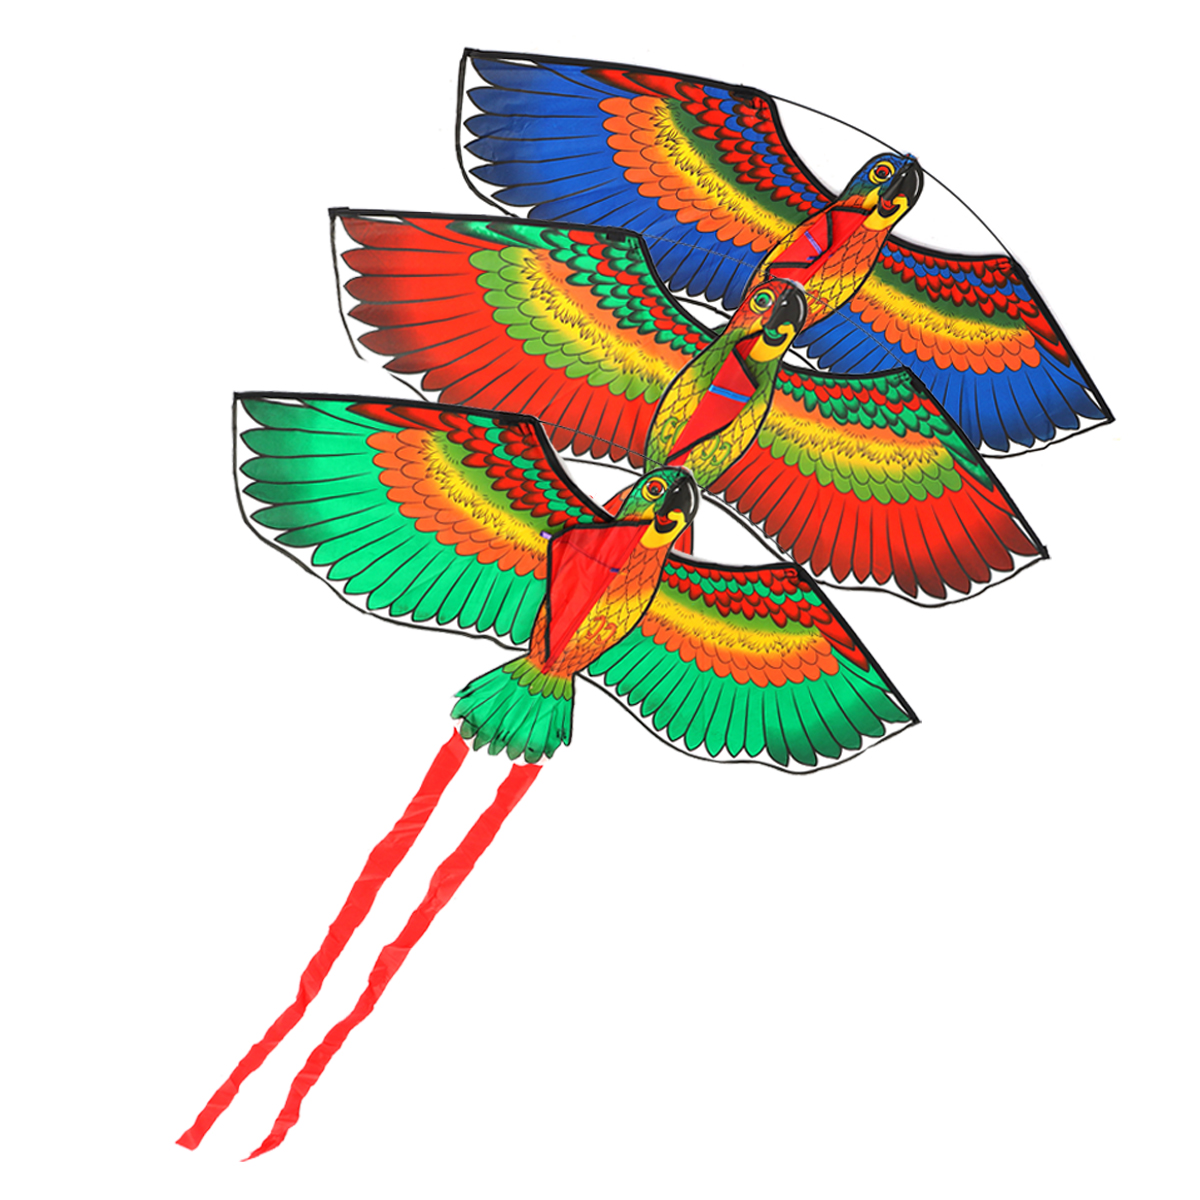 

Outdoor Beach Park Polyester Camping Flying Kite Bird Parrot Steady With String Spool For Adults Kids